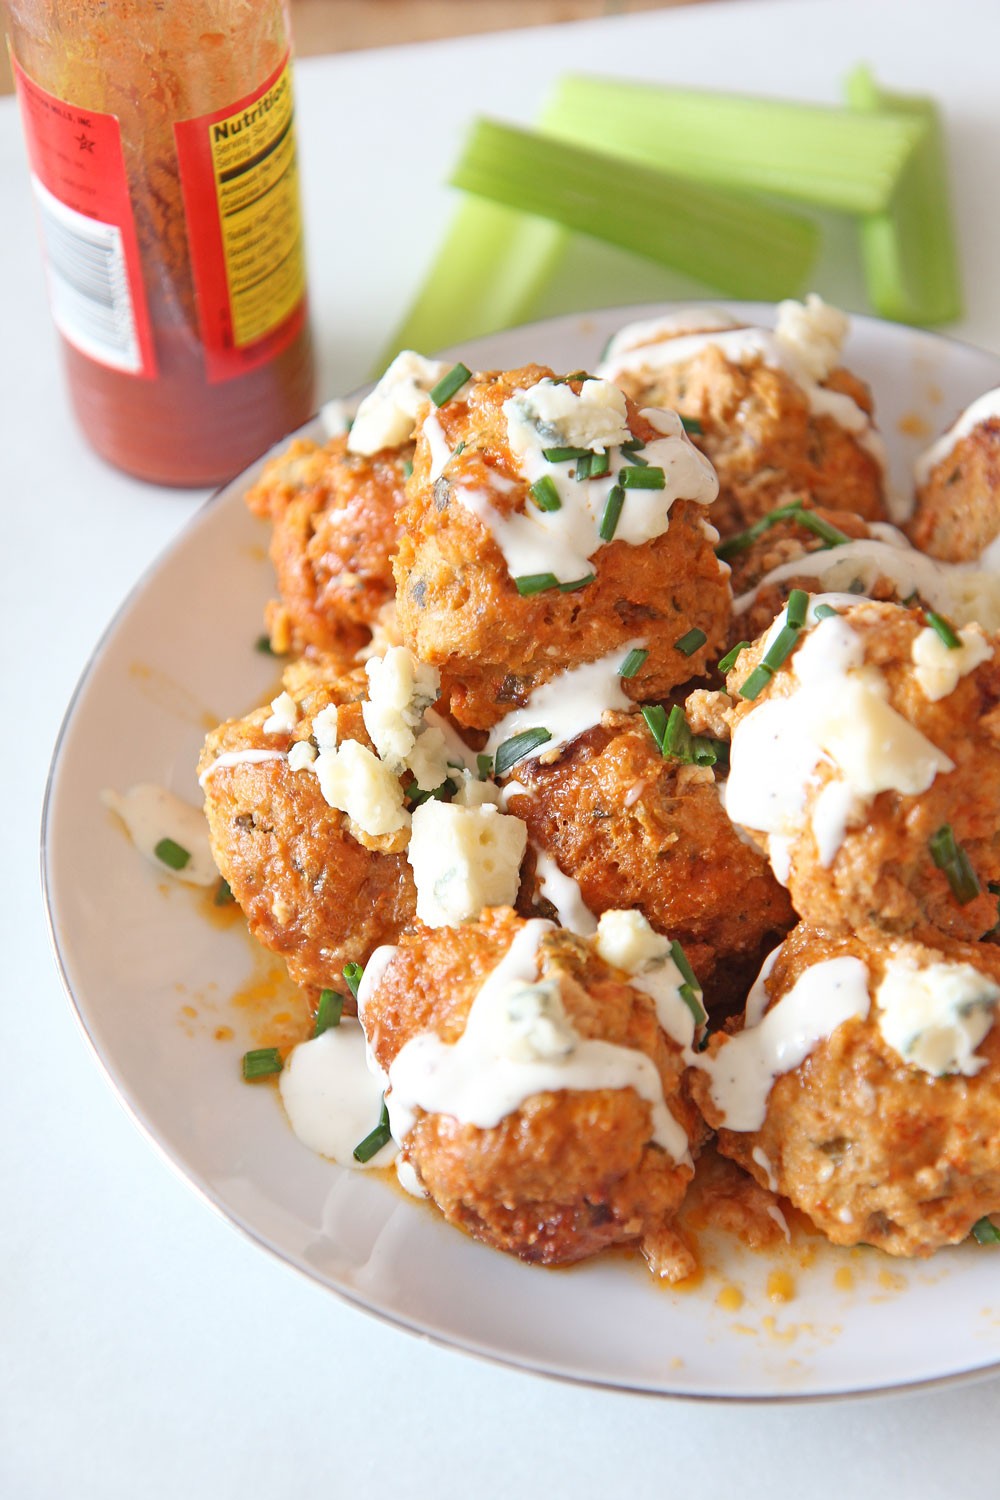 Slow Cooker Buffalo Chicken Meatballs Recipe. Grab chicken, ricotta, celery, eggs, bread crumbs, blue cheese, parsley, and ranch dressing. This is an easy dinner idea for when it is a busy weeknight! Happy cooking! #slowcookerrecipe #chickenmeatballs